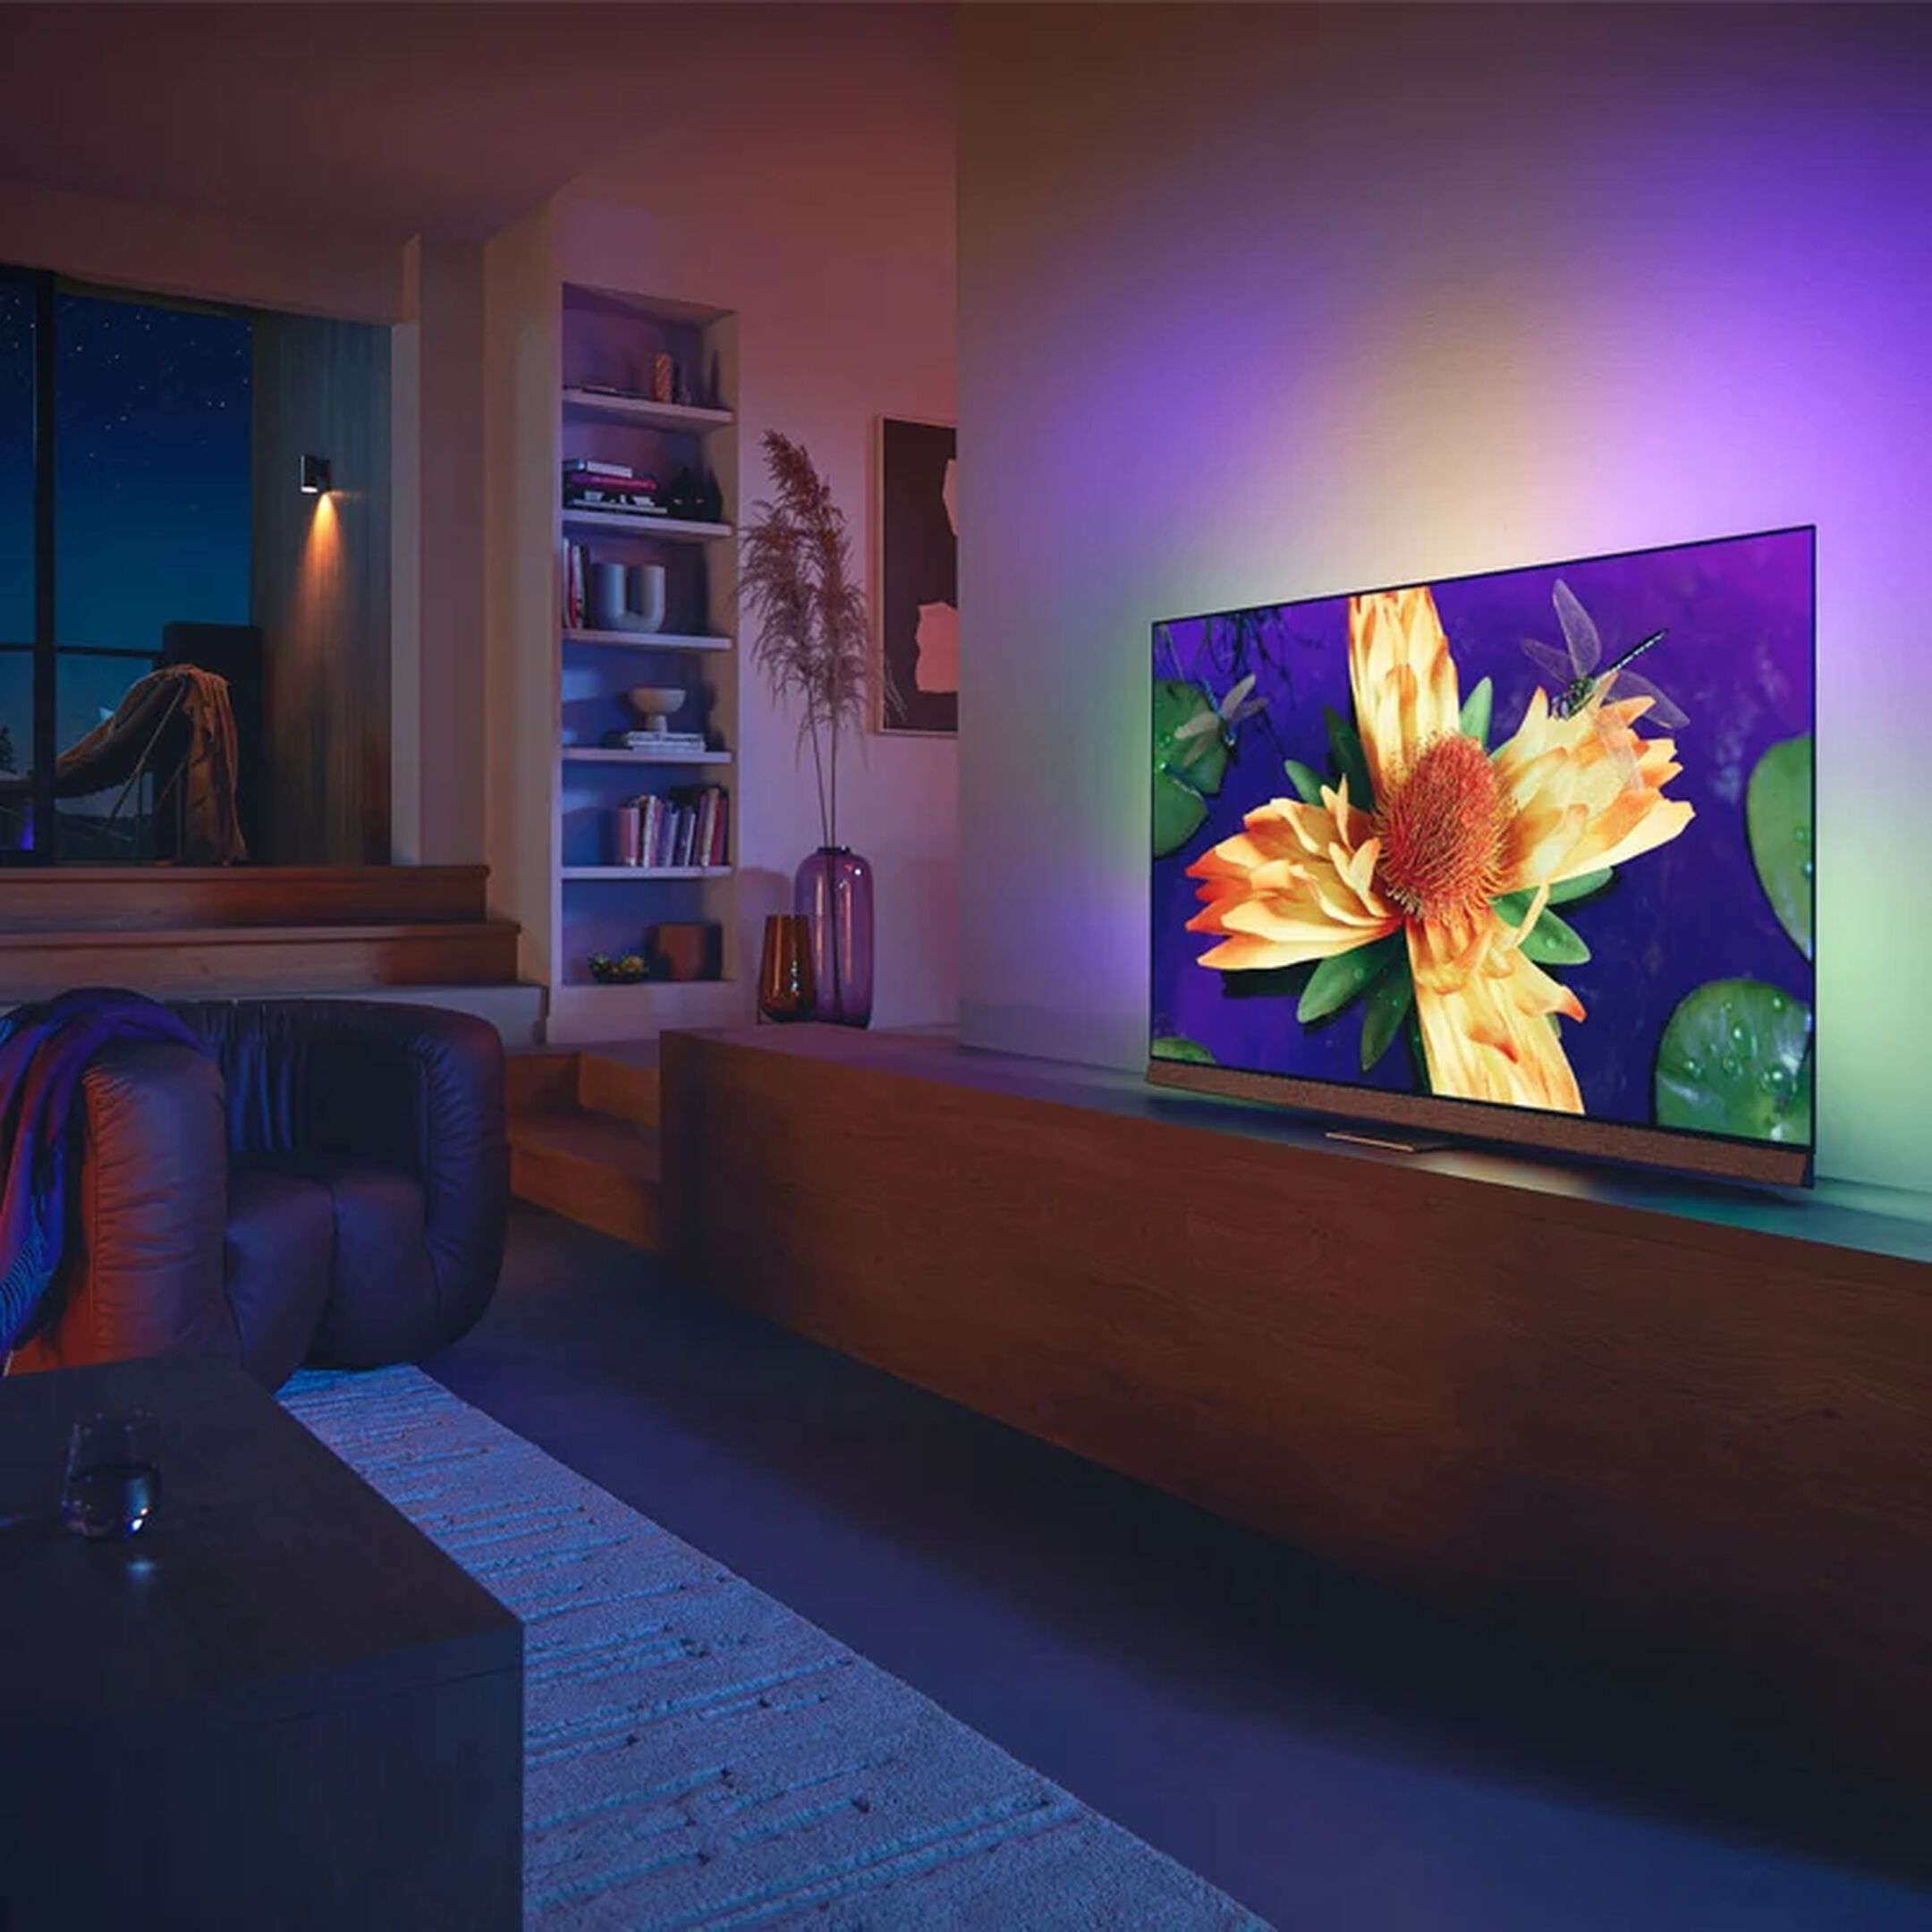 TV OLED Philips con audio Bowers & Wilkins